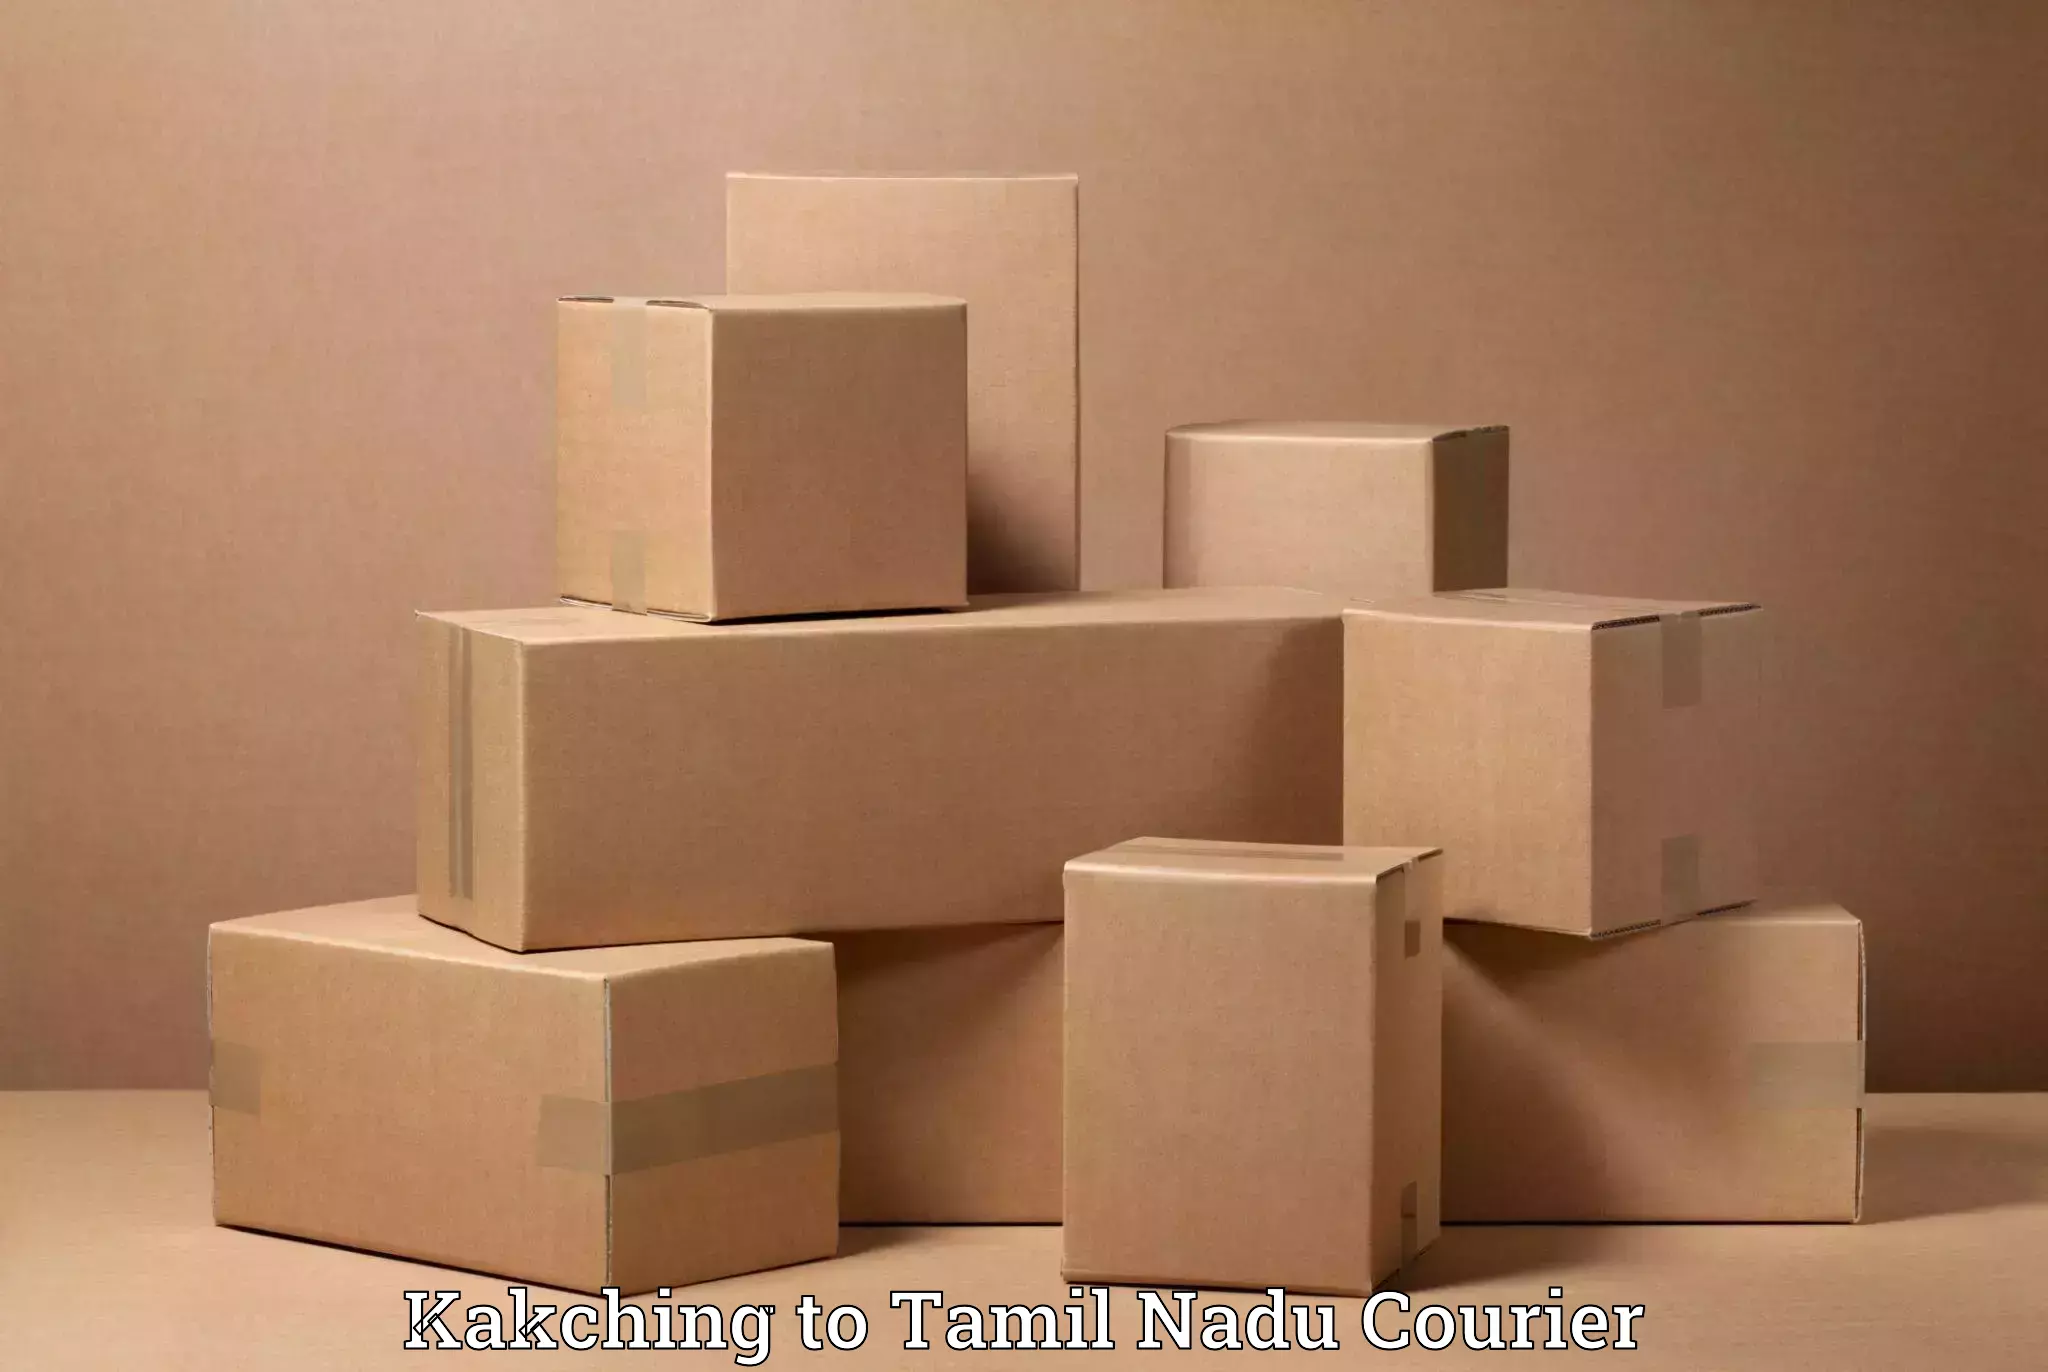 Trusted moving company Kakching to Tamil Nadu